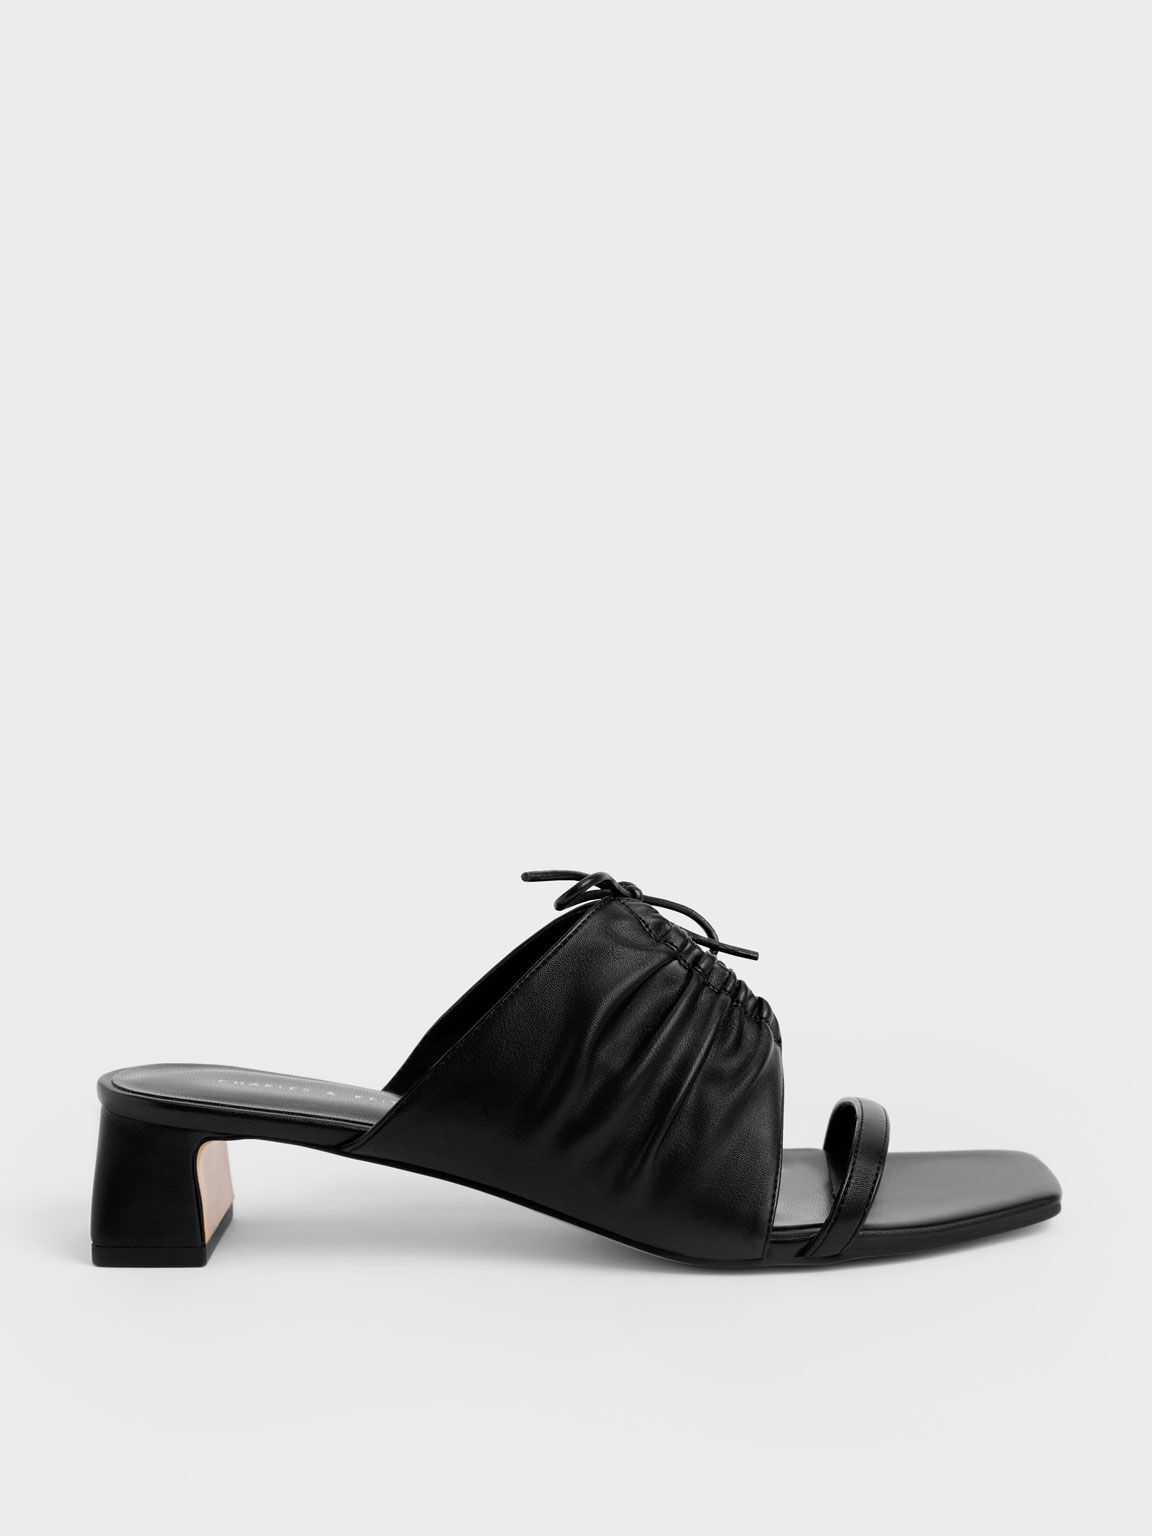 Bow-Tie Ruched Heeled Mules, Black, hi-res